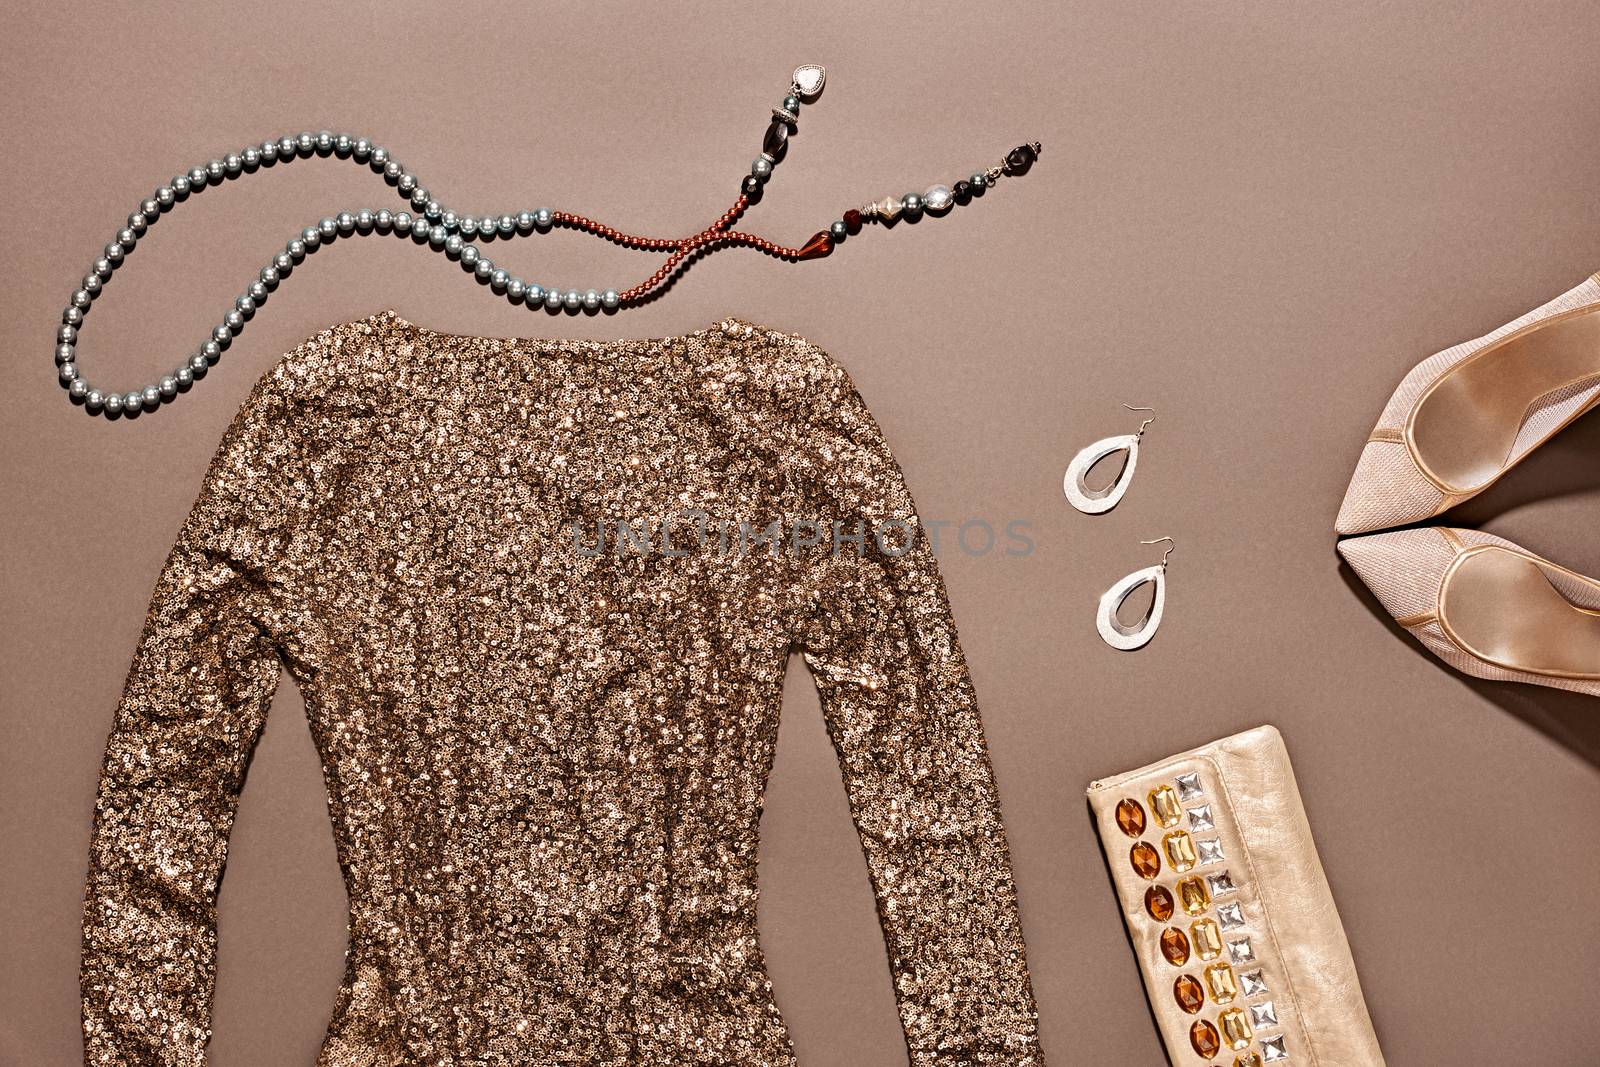 Fashion clothes stylish set, blue sequins dress and accessories. Glamor creative, trendy gold shiny clutch, necklaces, earrings, luxury shoes heels.  Unusual elegant evening party style, copyspace